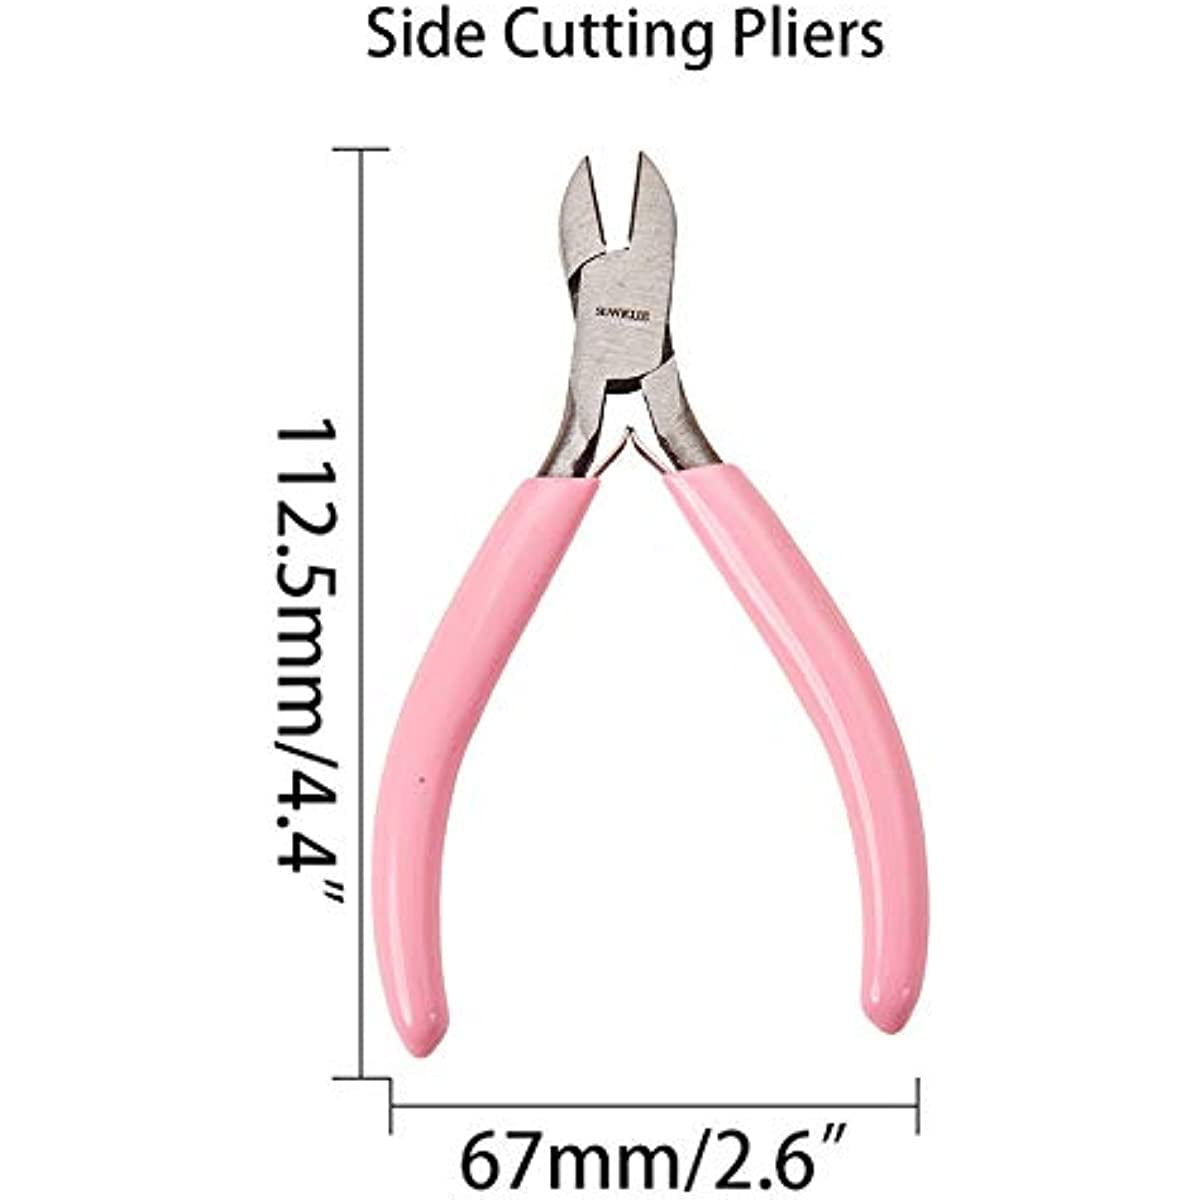 End Cutter Pliers 5-1/4 (133mm) Jewelry Waymil Pliers Beading Hobby Wire Work